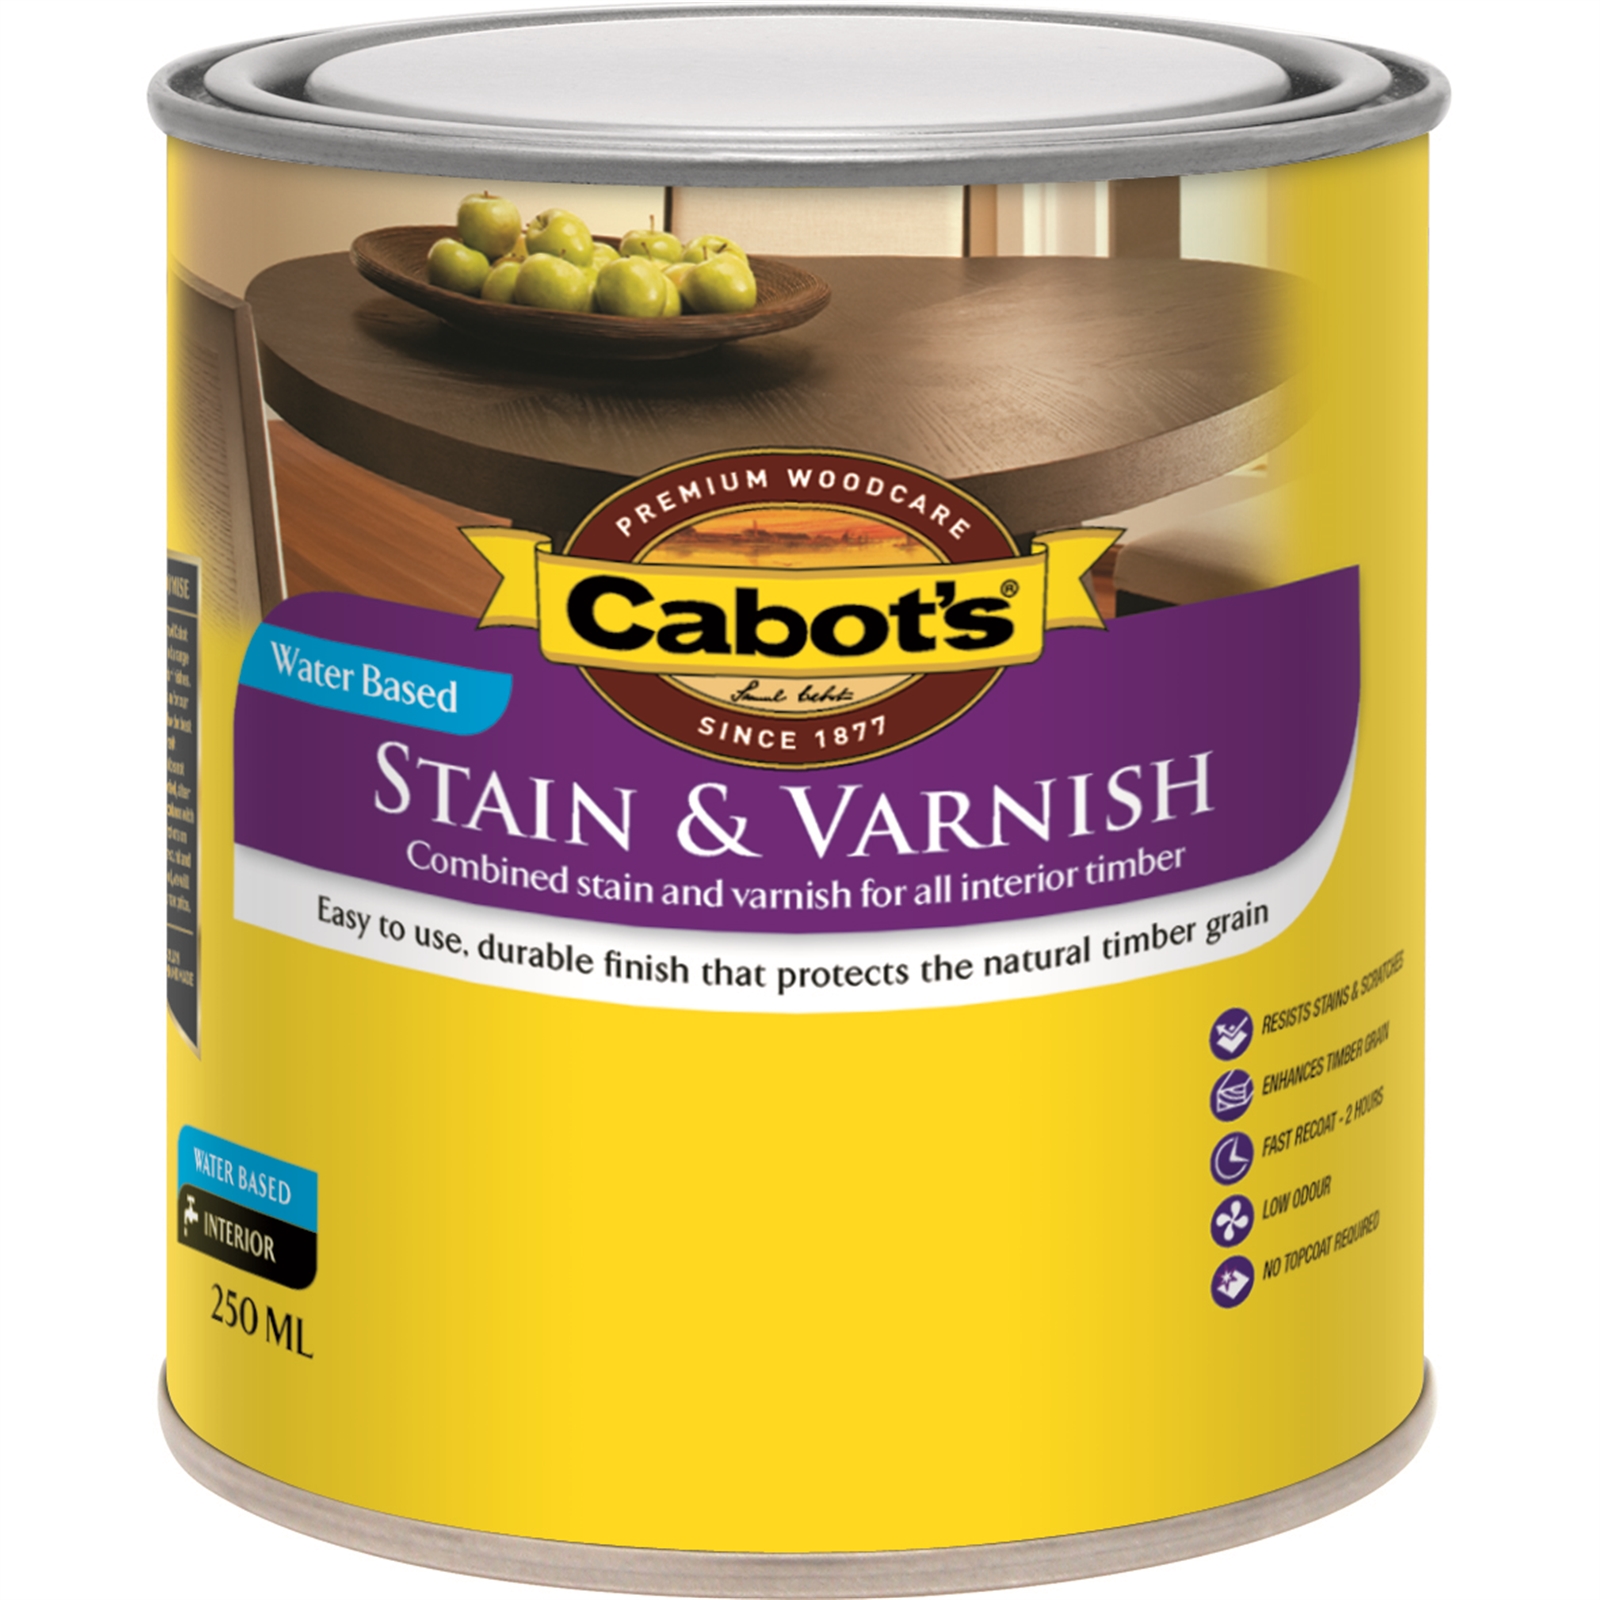 Cabot's 250ml Gloss Maple Water Based Stain and Varnish